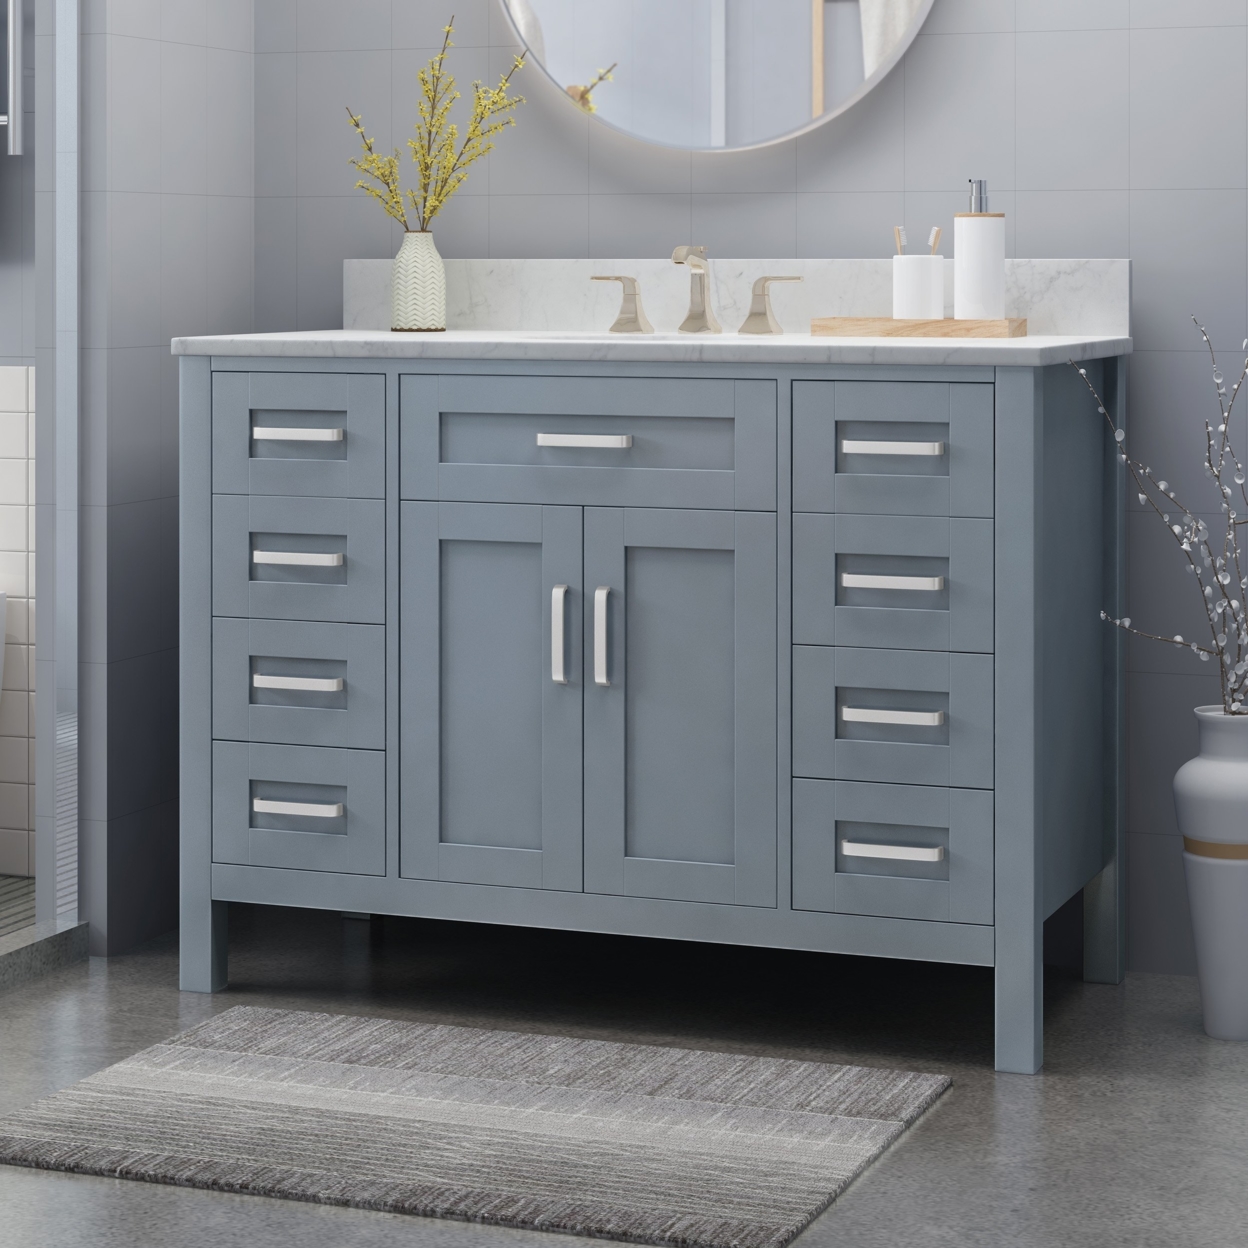 Greeley Contemporary 48 Wood Single Sink Bathroom Vanity With Marble Counter Top With Carrara White Marble - Gray